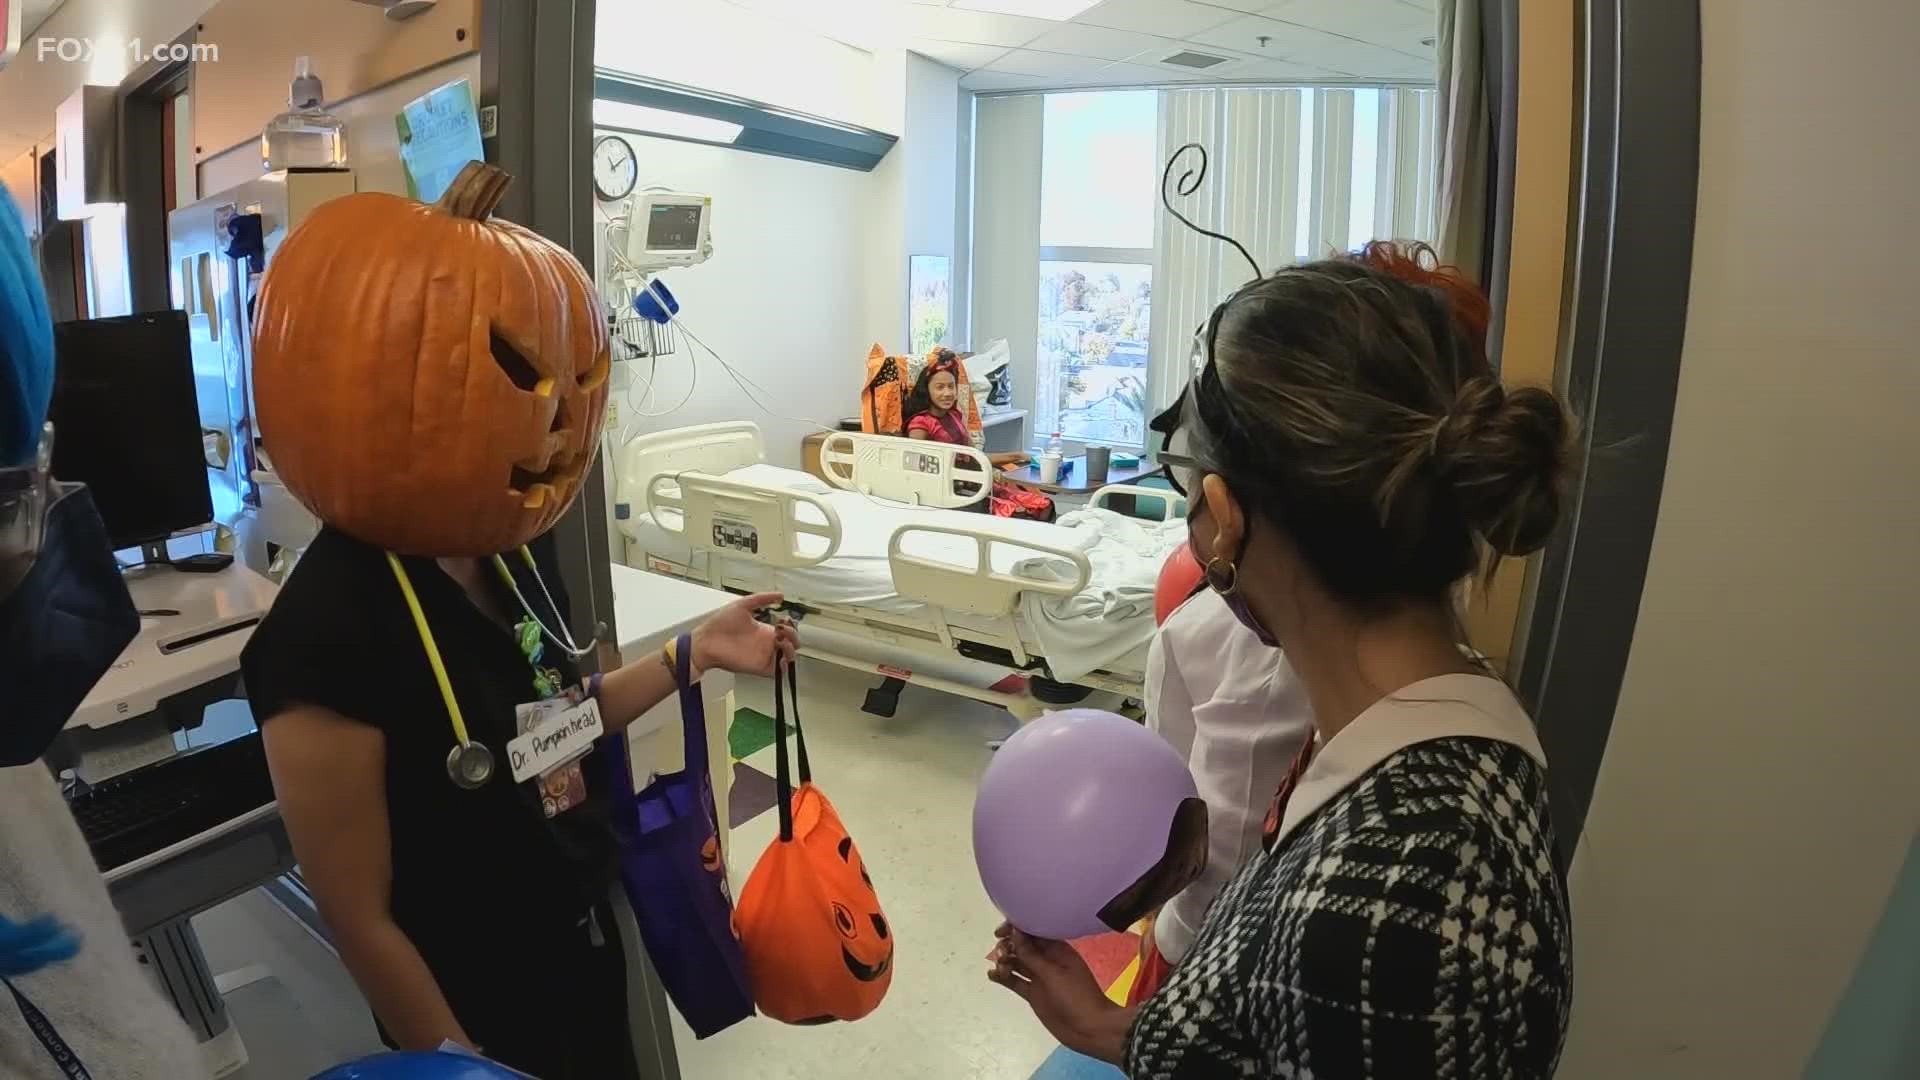 No tricks and all treats – that’s the thinking at Connecticut Children’s where, each year, the hospital staff makes sure the patients get to enjoy Halloween.